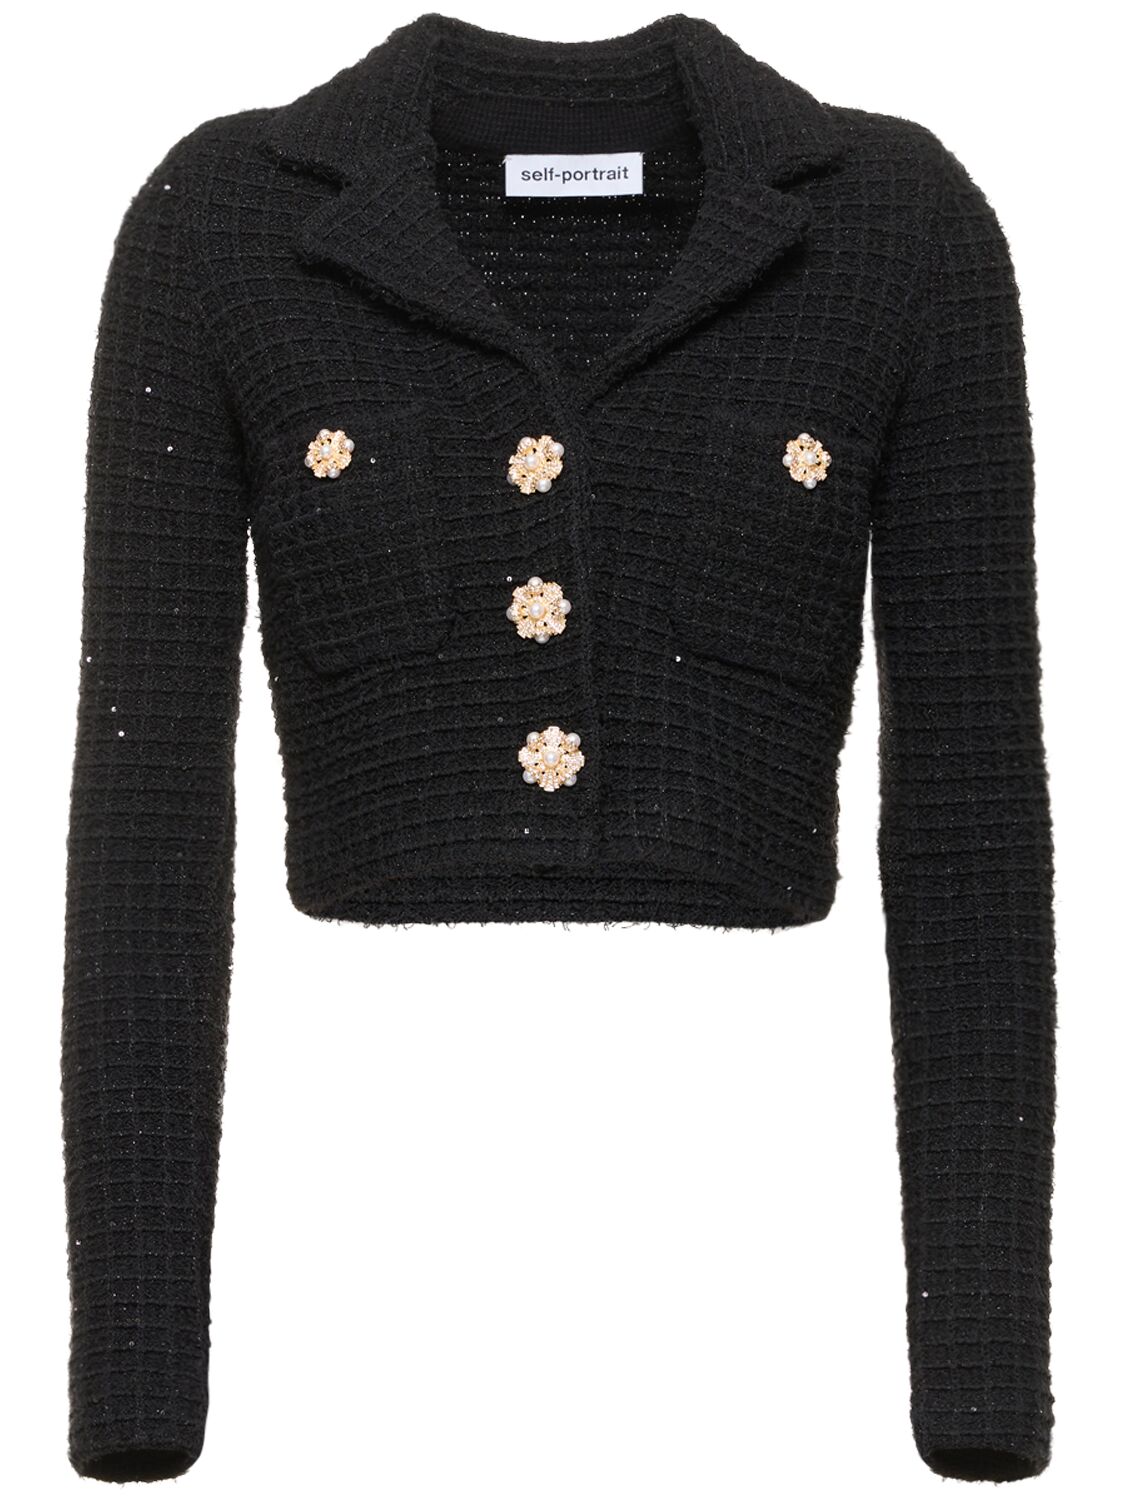 Sequined Textured Knit Jacket – WOMEN > CLOTHING > JACKETS